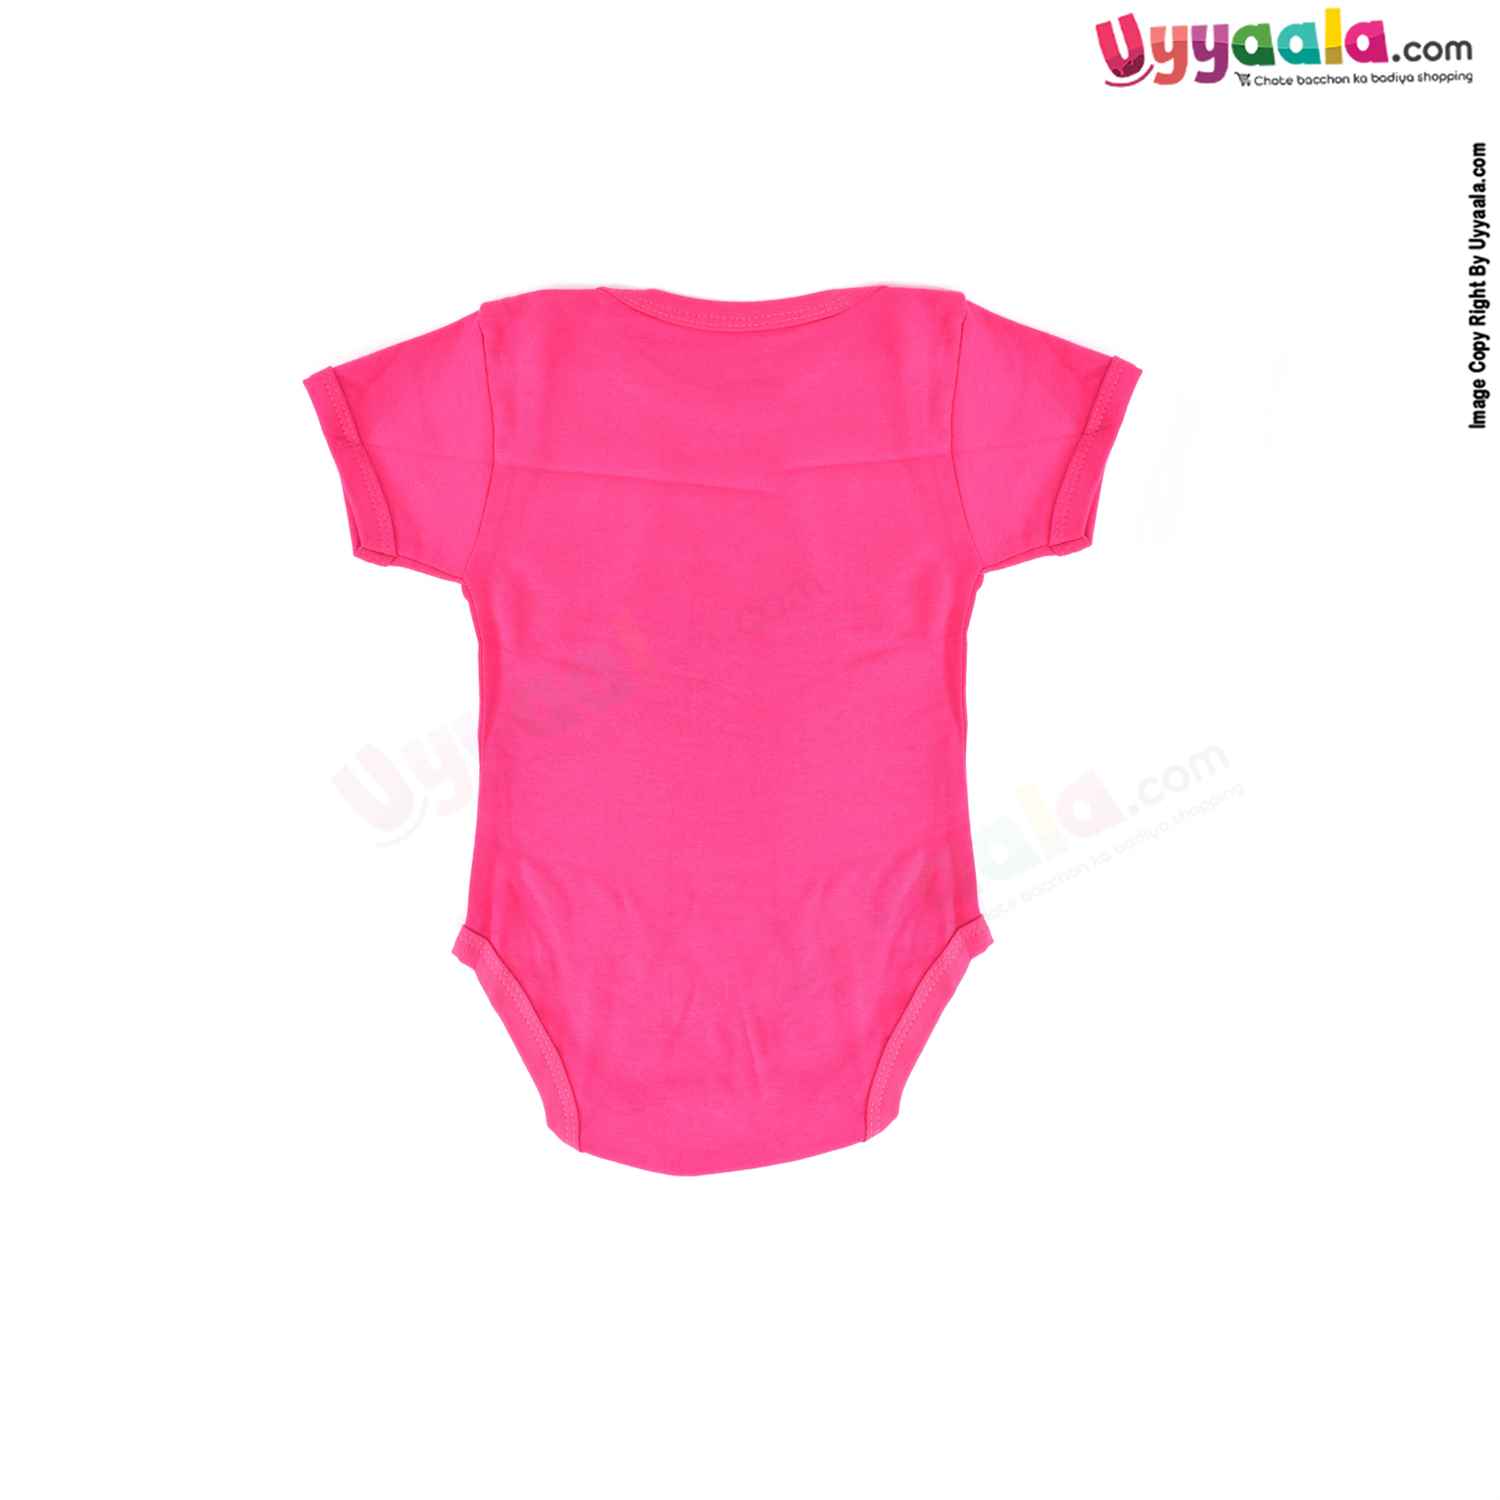 Precious One Short Sleeve Body Suit 100% Soft Hosiery Cotton - Pink with Boat Print (6-9M)